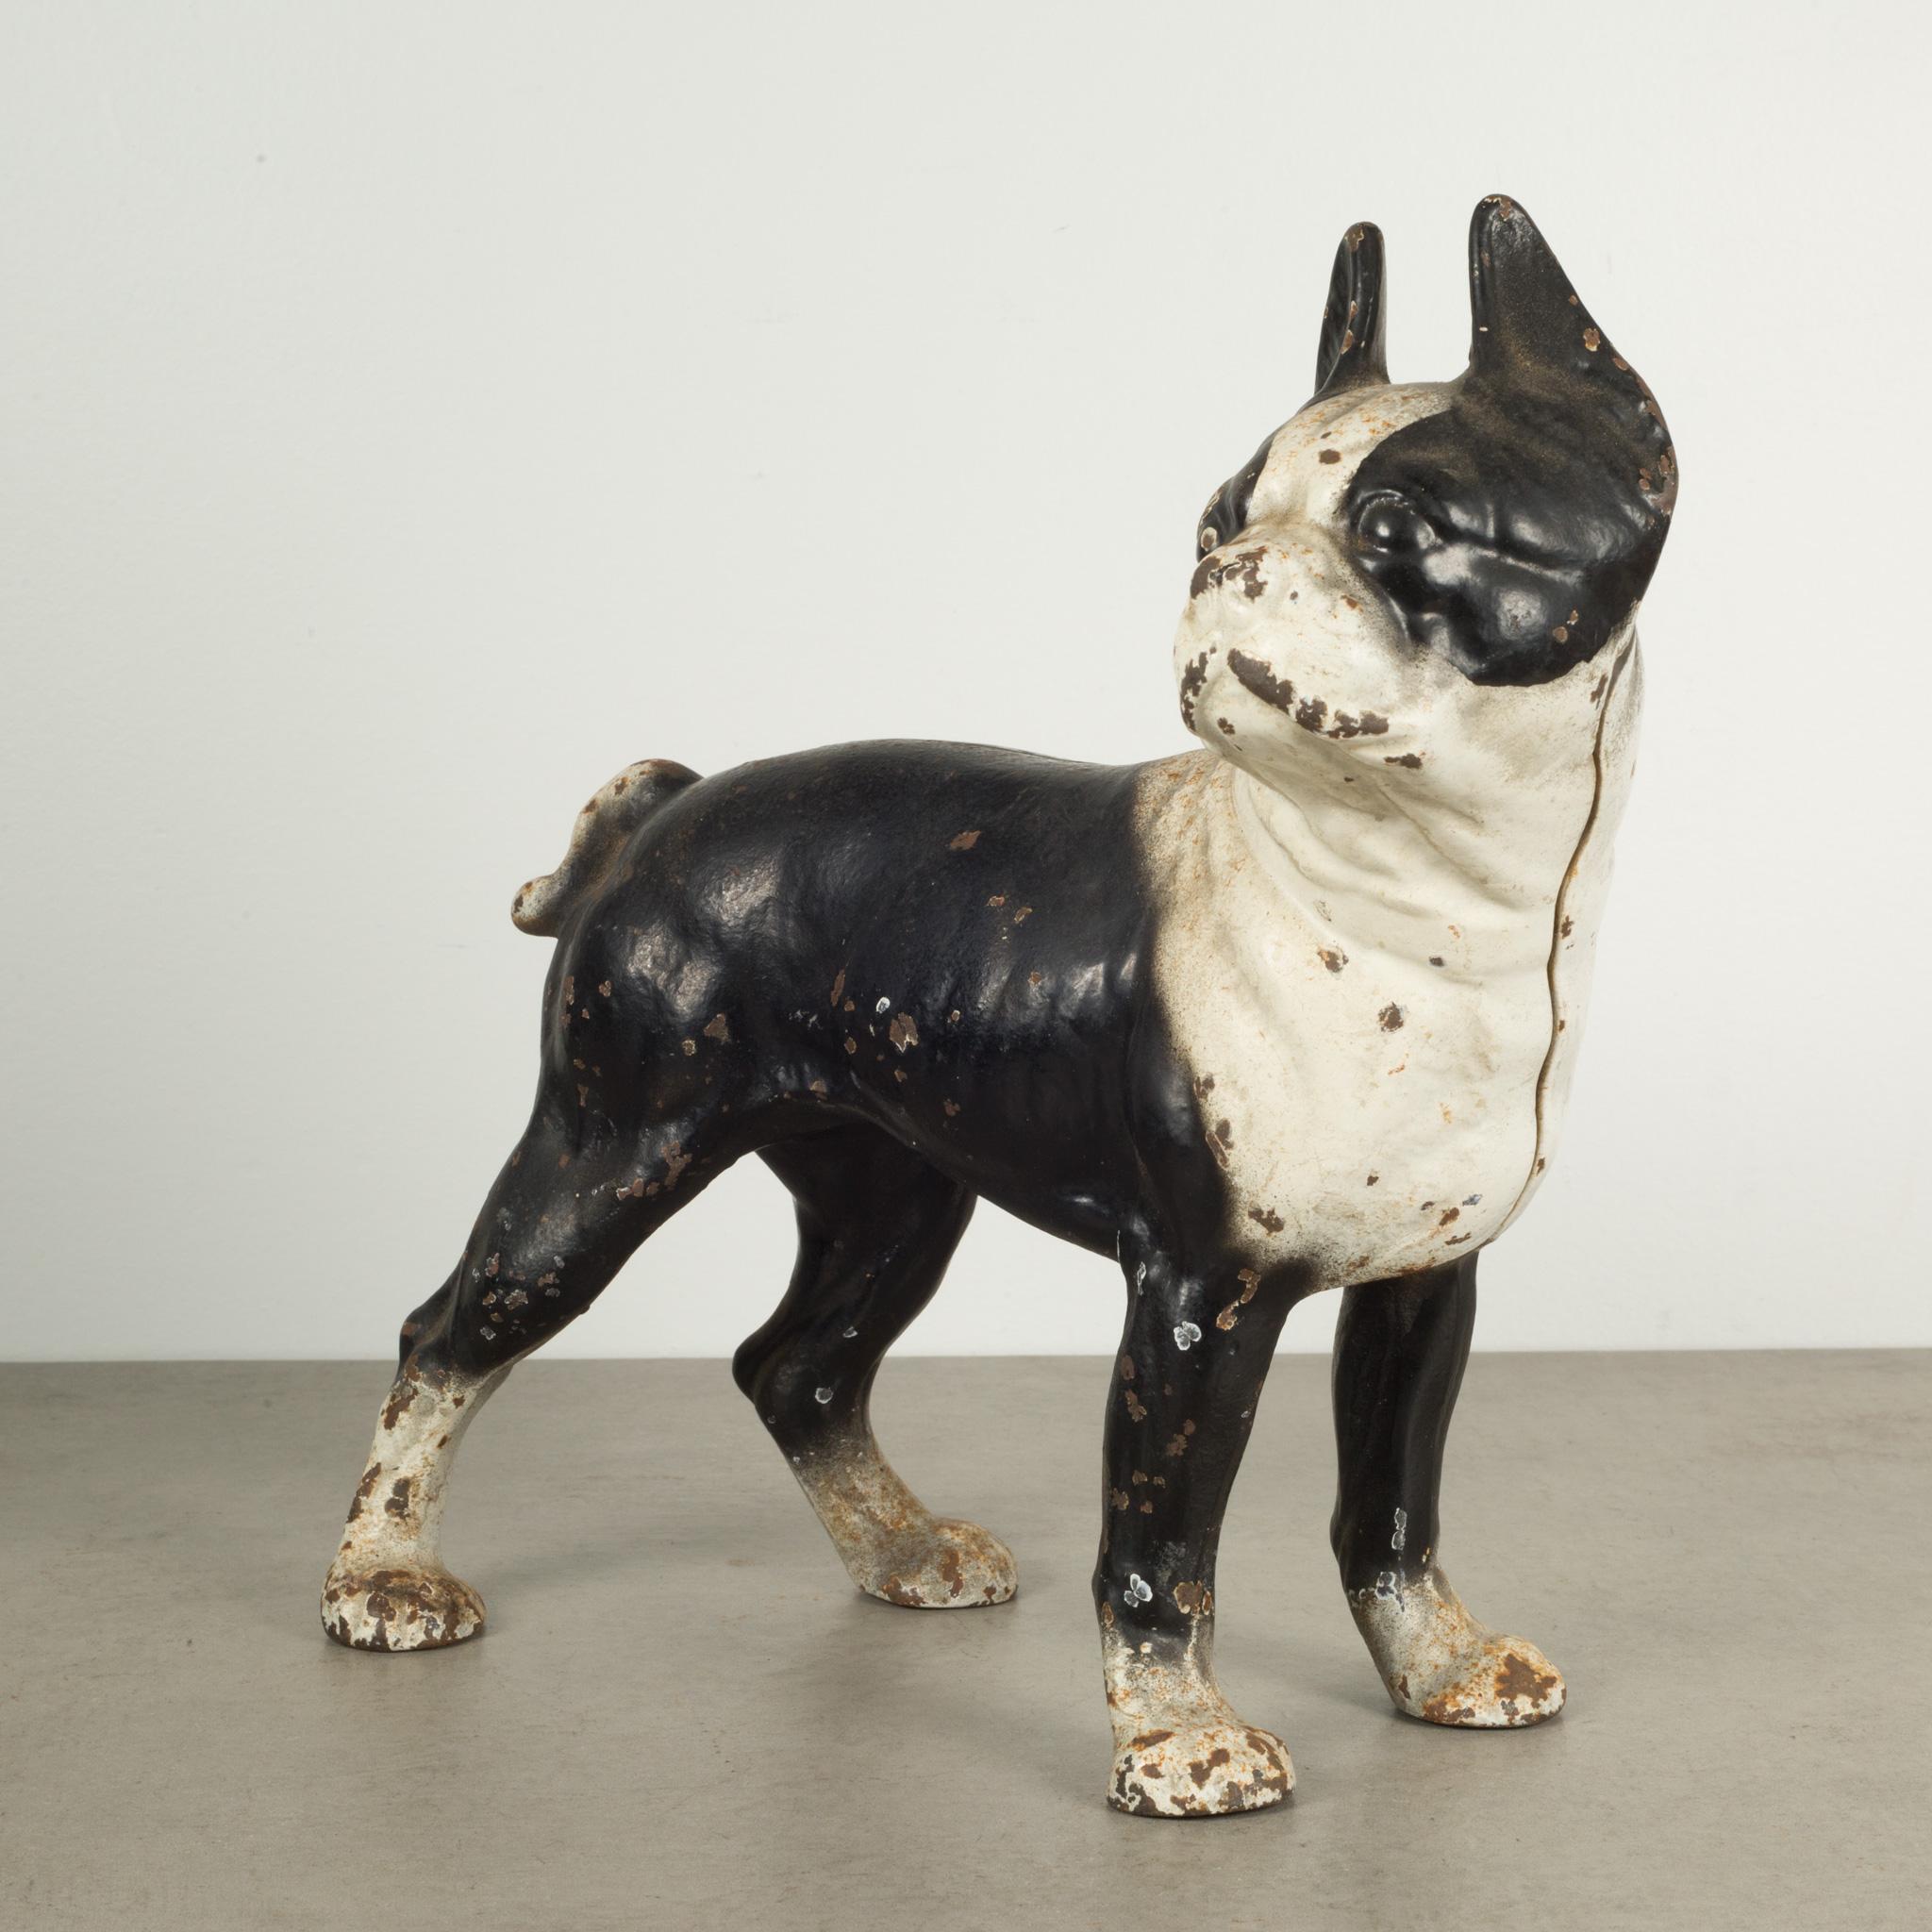 About

This is an original cast iron Boston Terrier doorstop manufactured by the Hubley Manufacturing Company in Lancaster Pennsylvania USA. The piece has retained its original hand painted finish and is in good condition with the appropriate patina